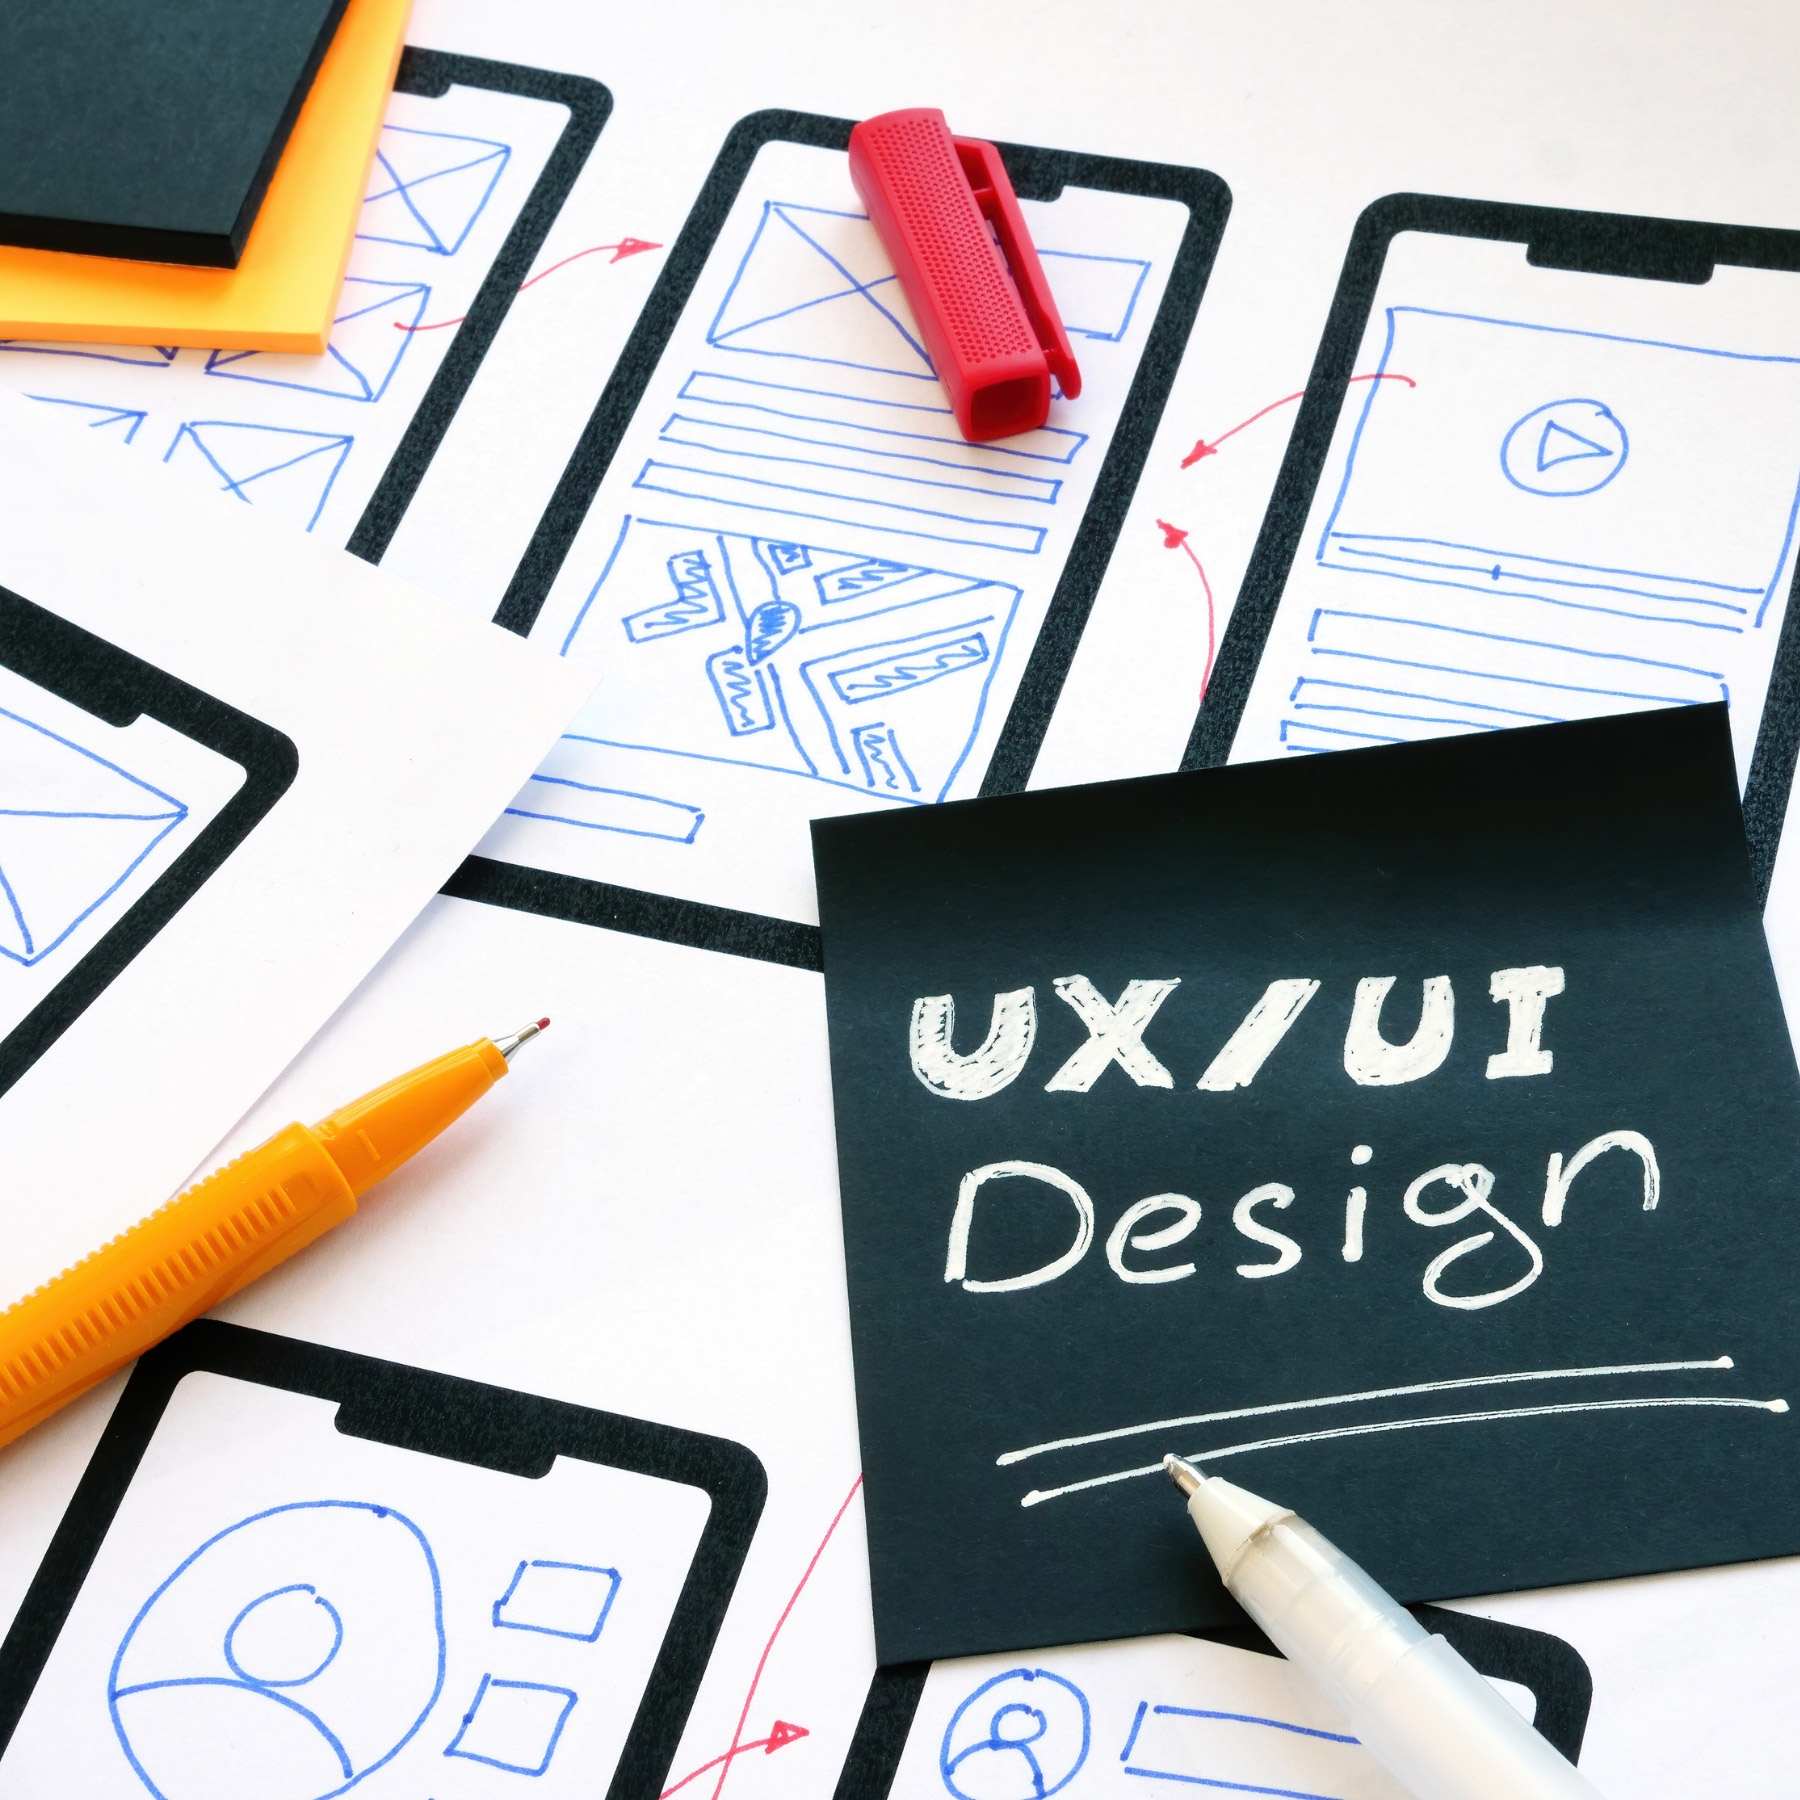 What are UX and UI designs and why are they so necessary?